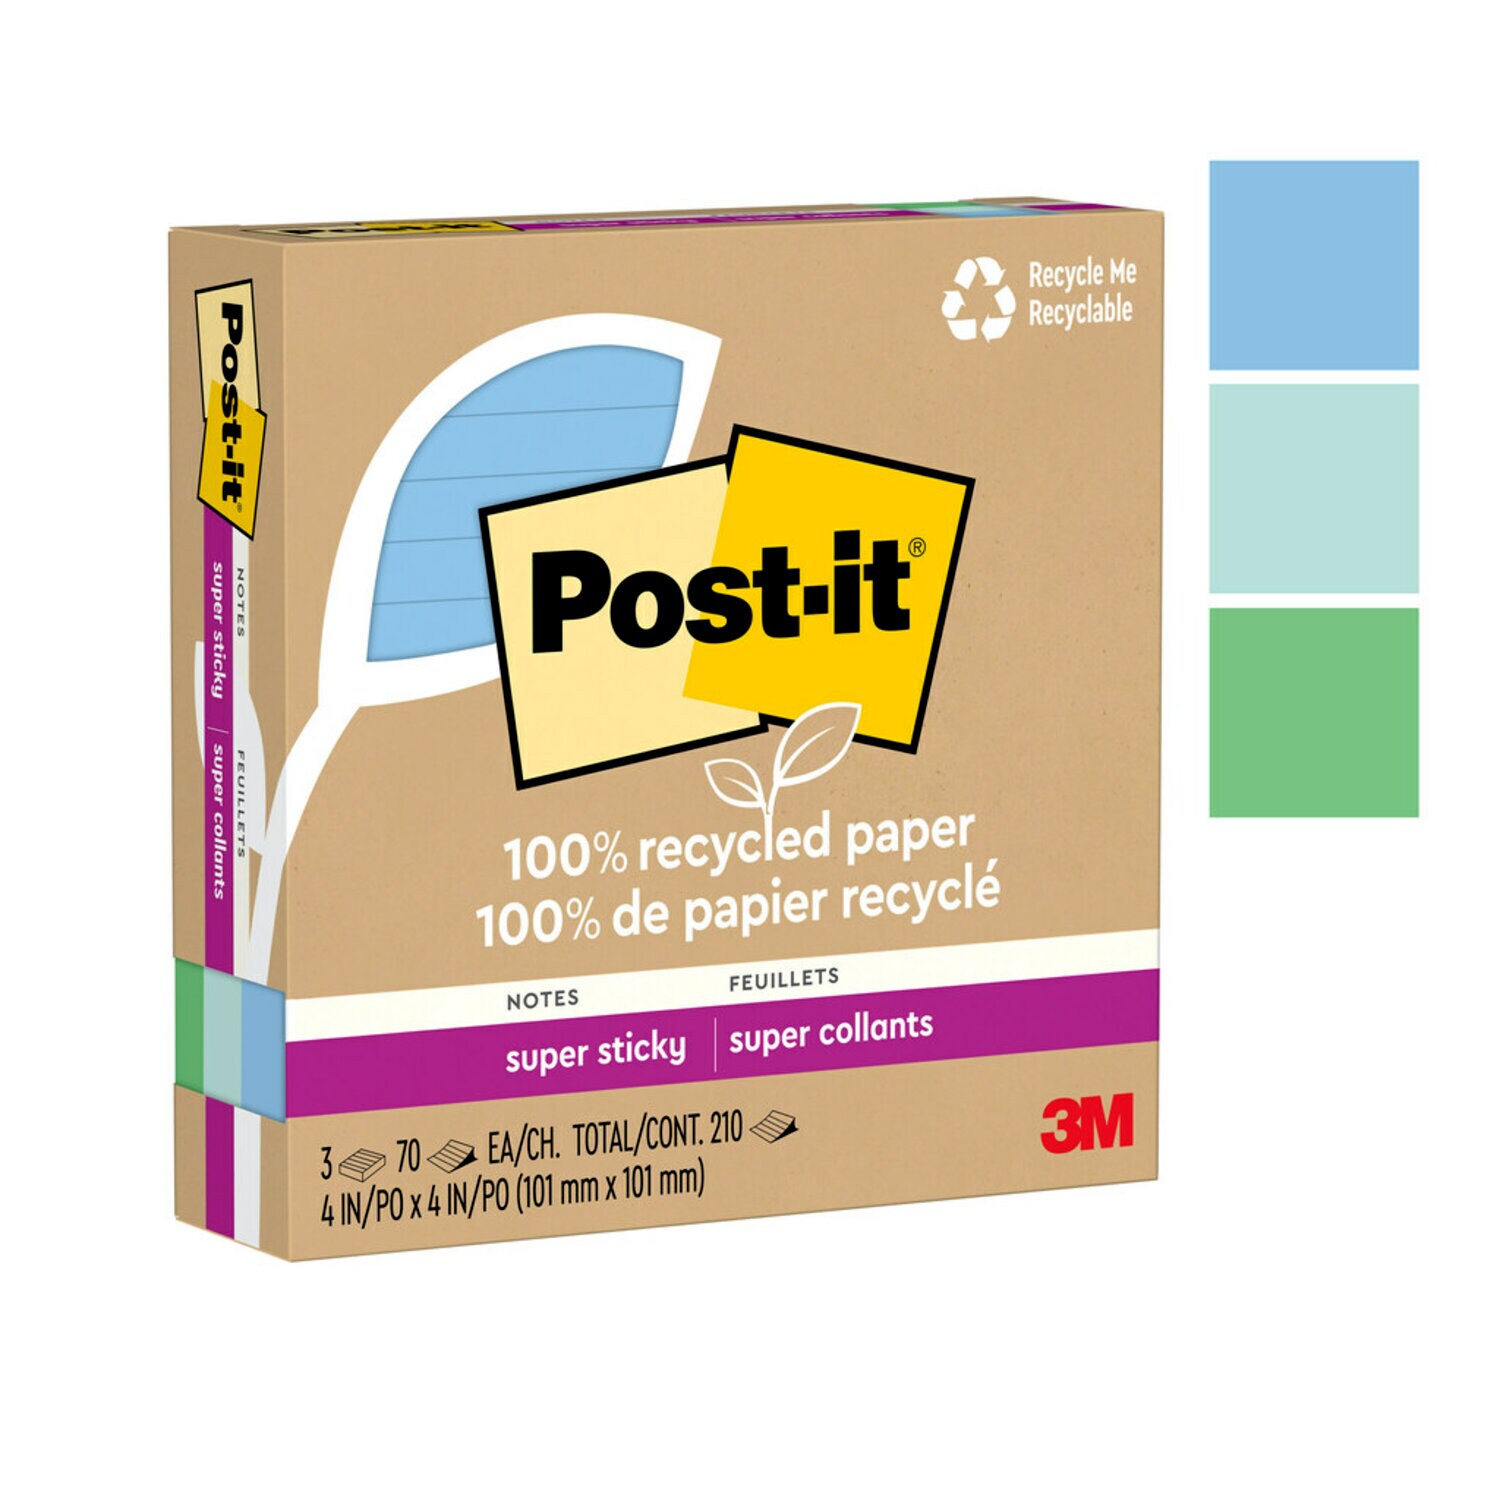 7100290144 - Post-it Super Sticky Recycled Notes 675R-3SST, 4 in x 4 in (101 mm x 101 mm)